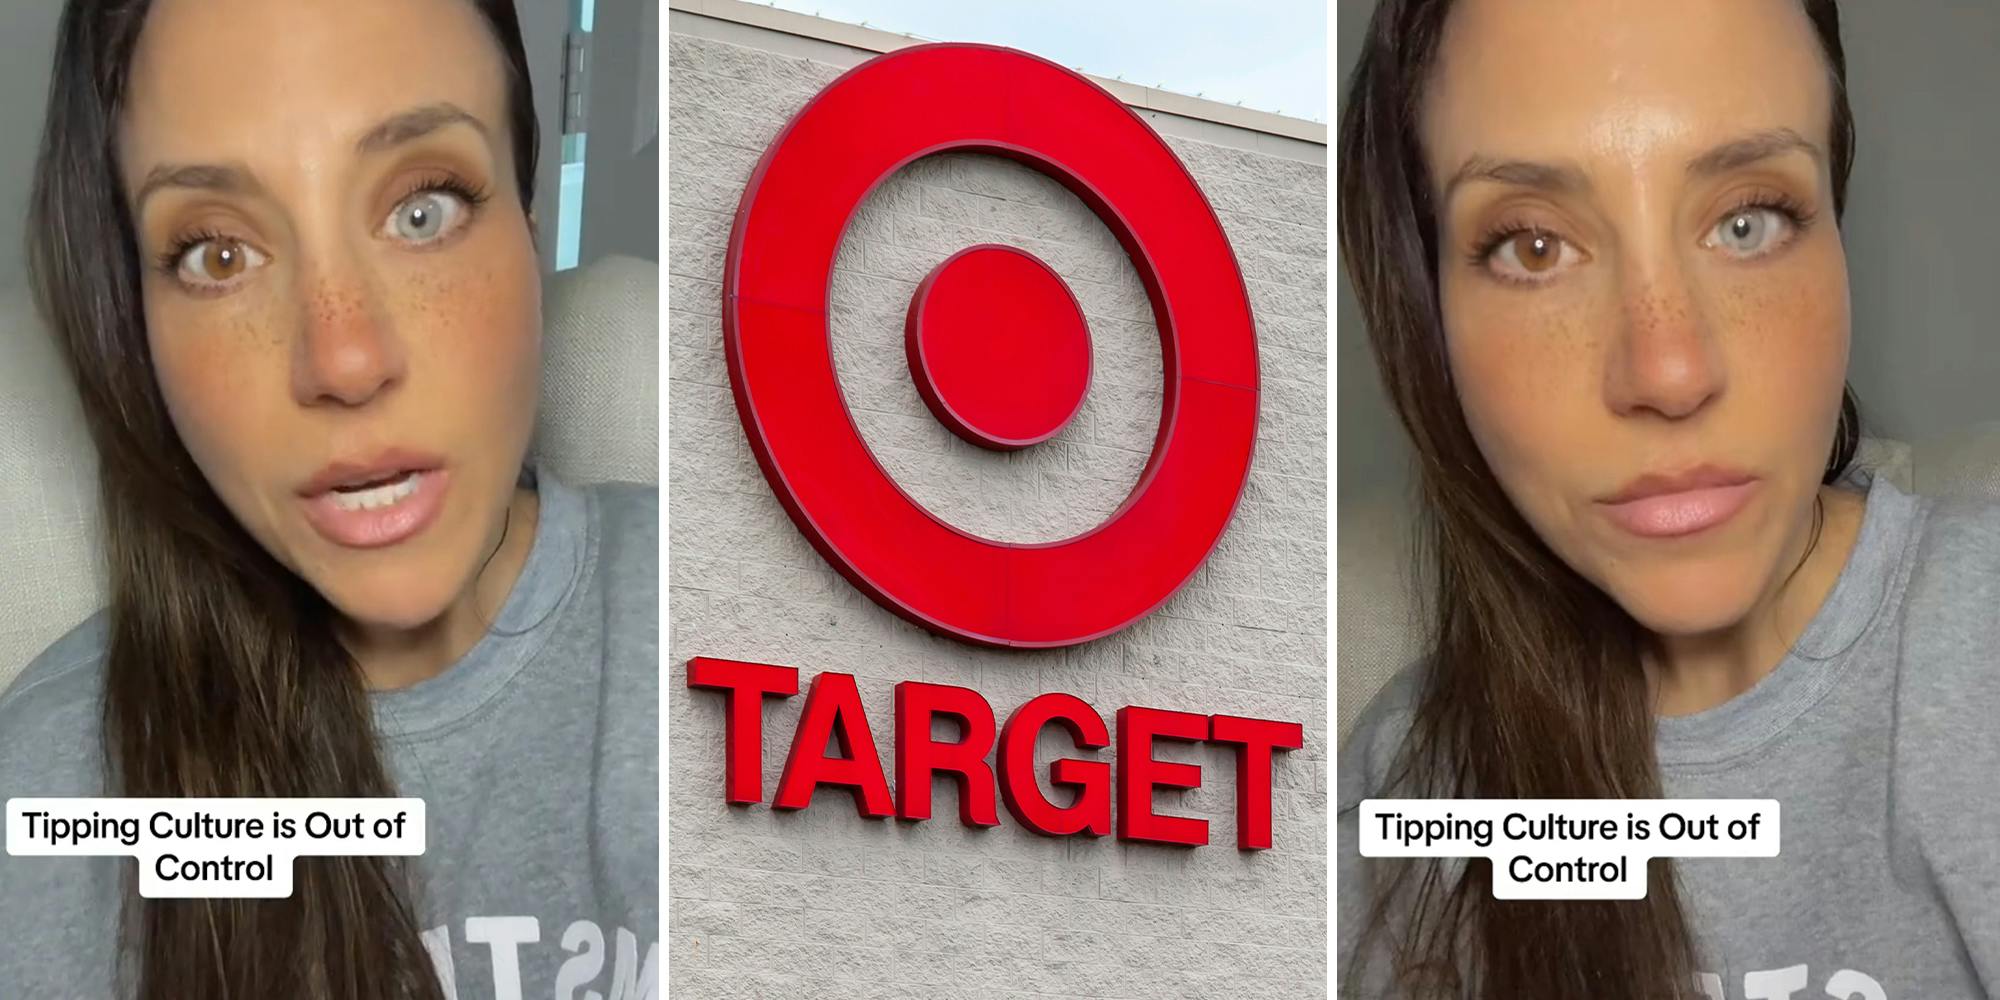 ‘You shouldn’t have to pay for the service AND the tip!’: Woman says she was asked to tip $84 for Target order after paying for $49 subscription